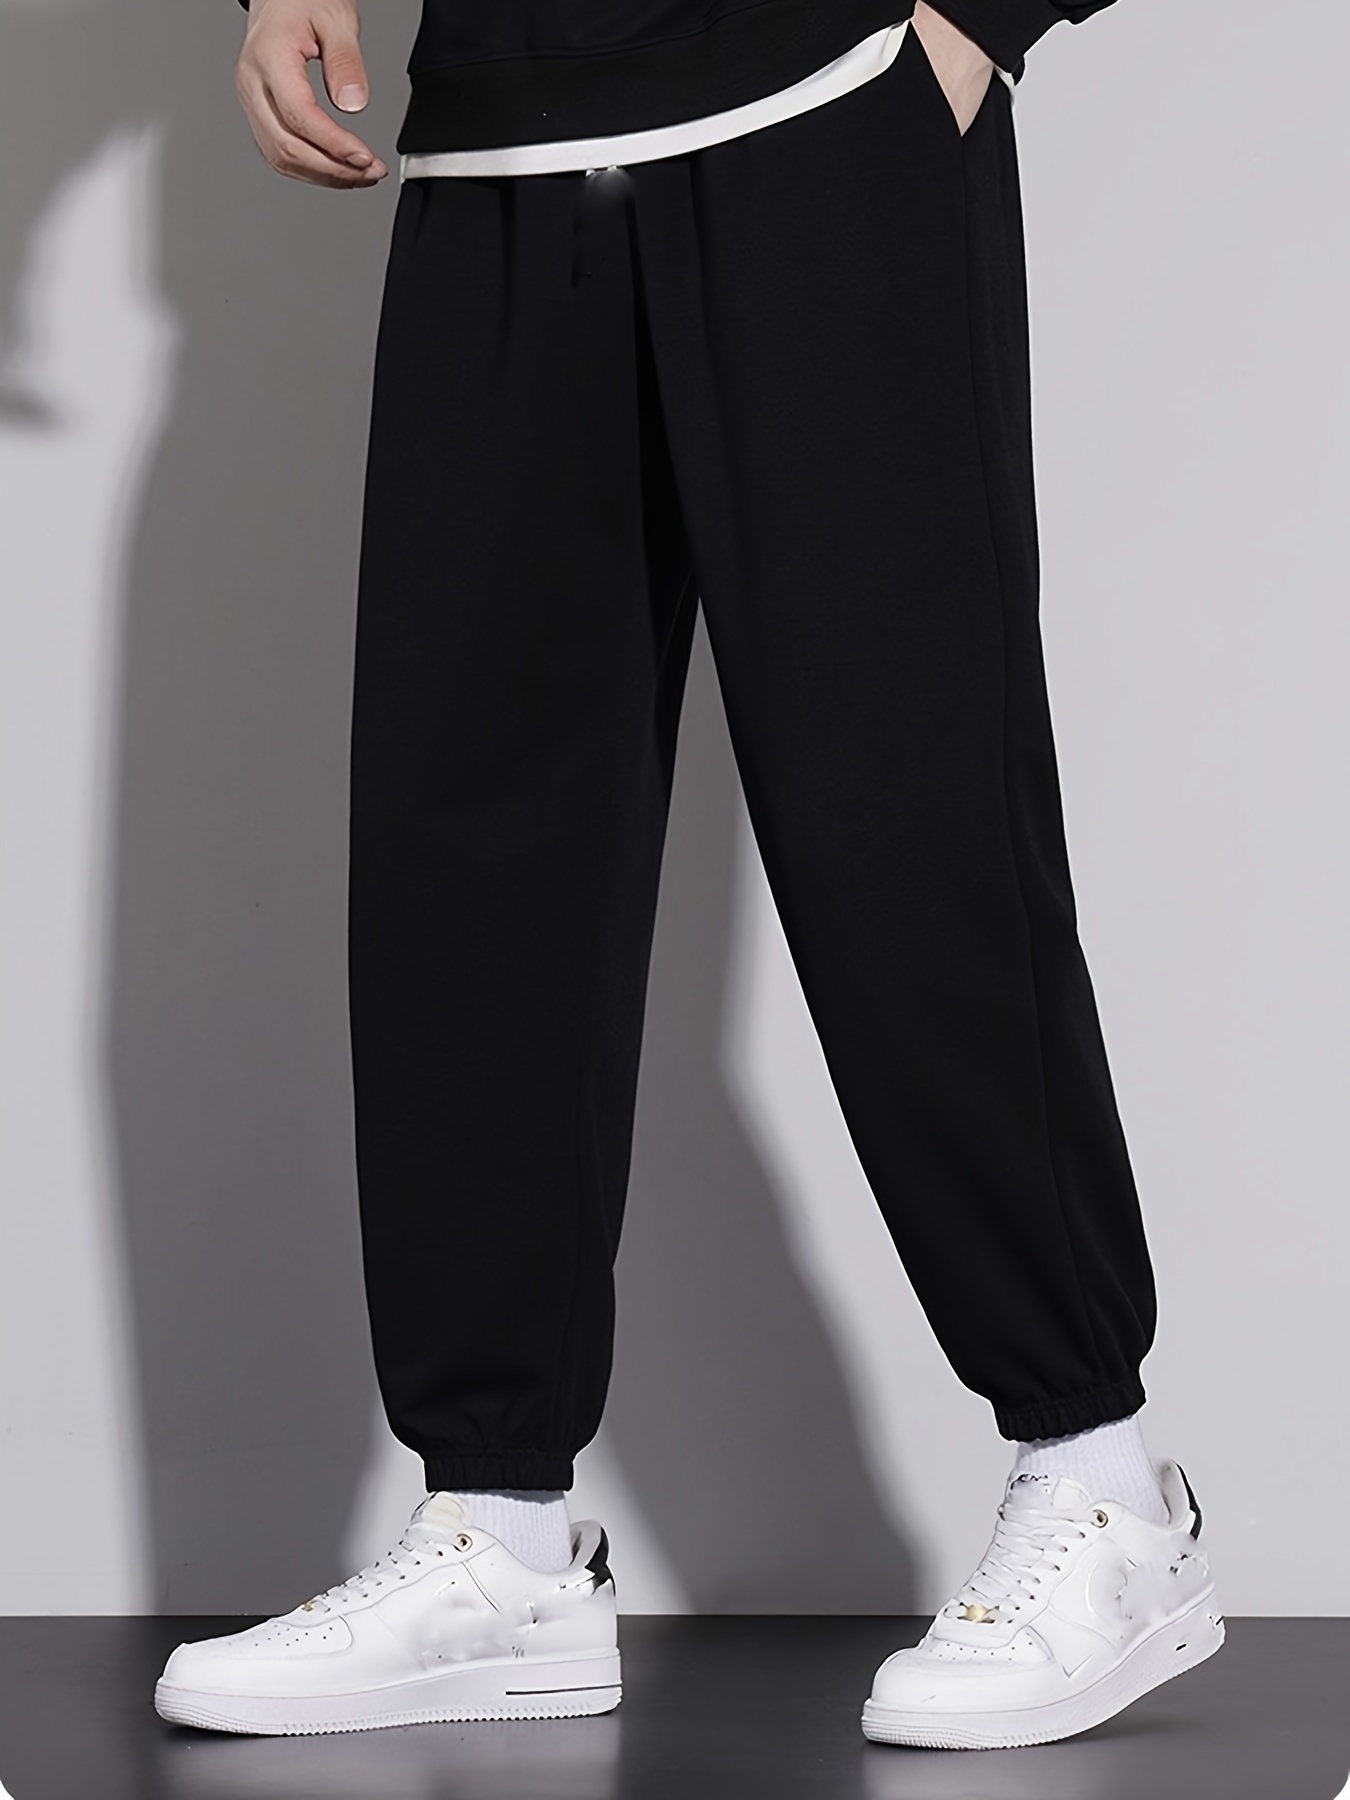 ZHAGHMIN Pans Para Hombre Male Casual Fitness Running Trousers Drawstring  Loose Waist Solid Color Pants Pocket Loose Sweatpants 8 Simple Open Leg